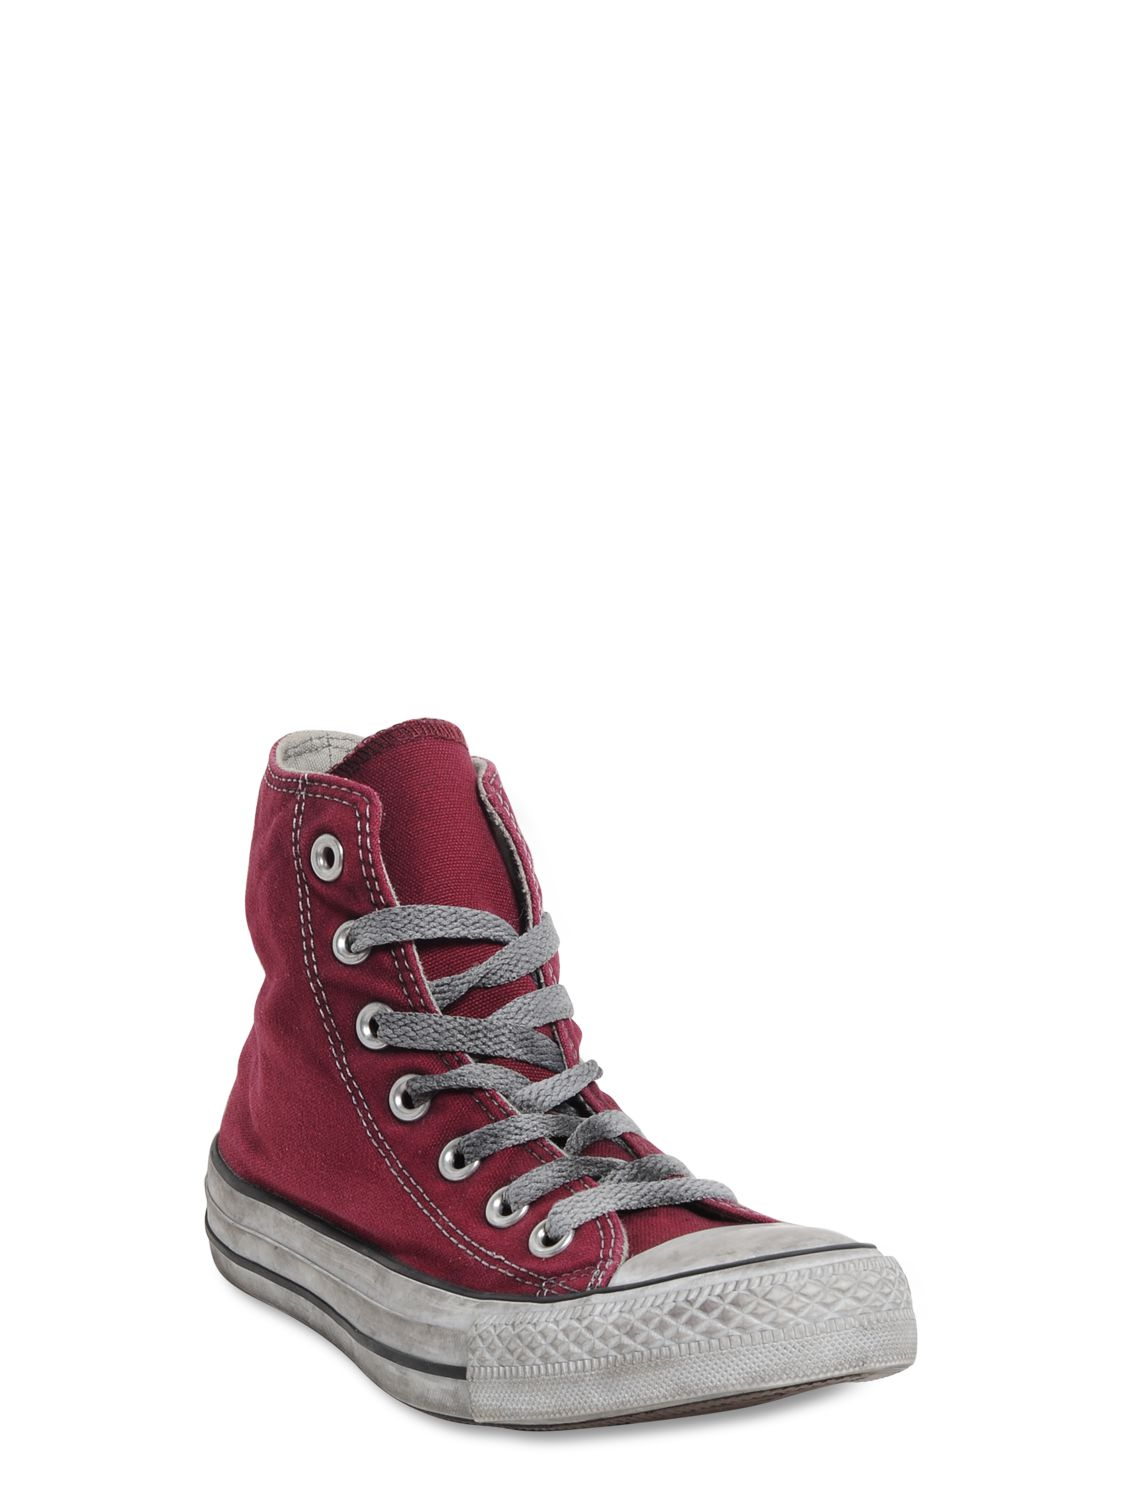 Converse Limited Edition All Stars Sneakers in Red for Men | Lyst